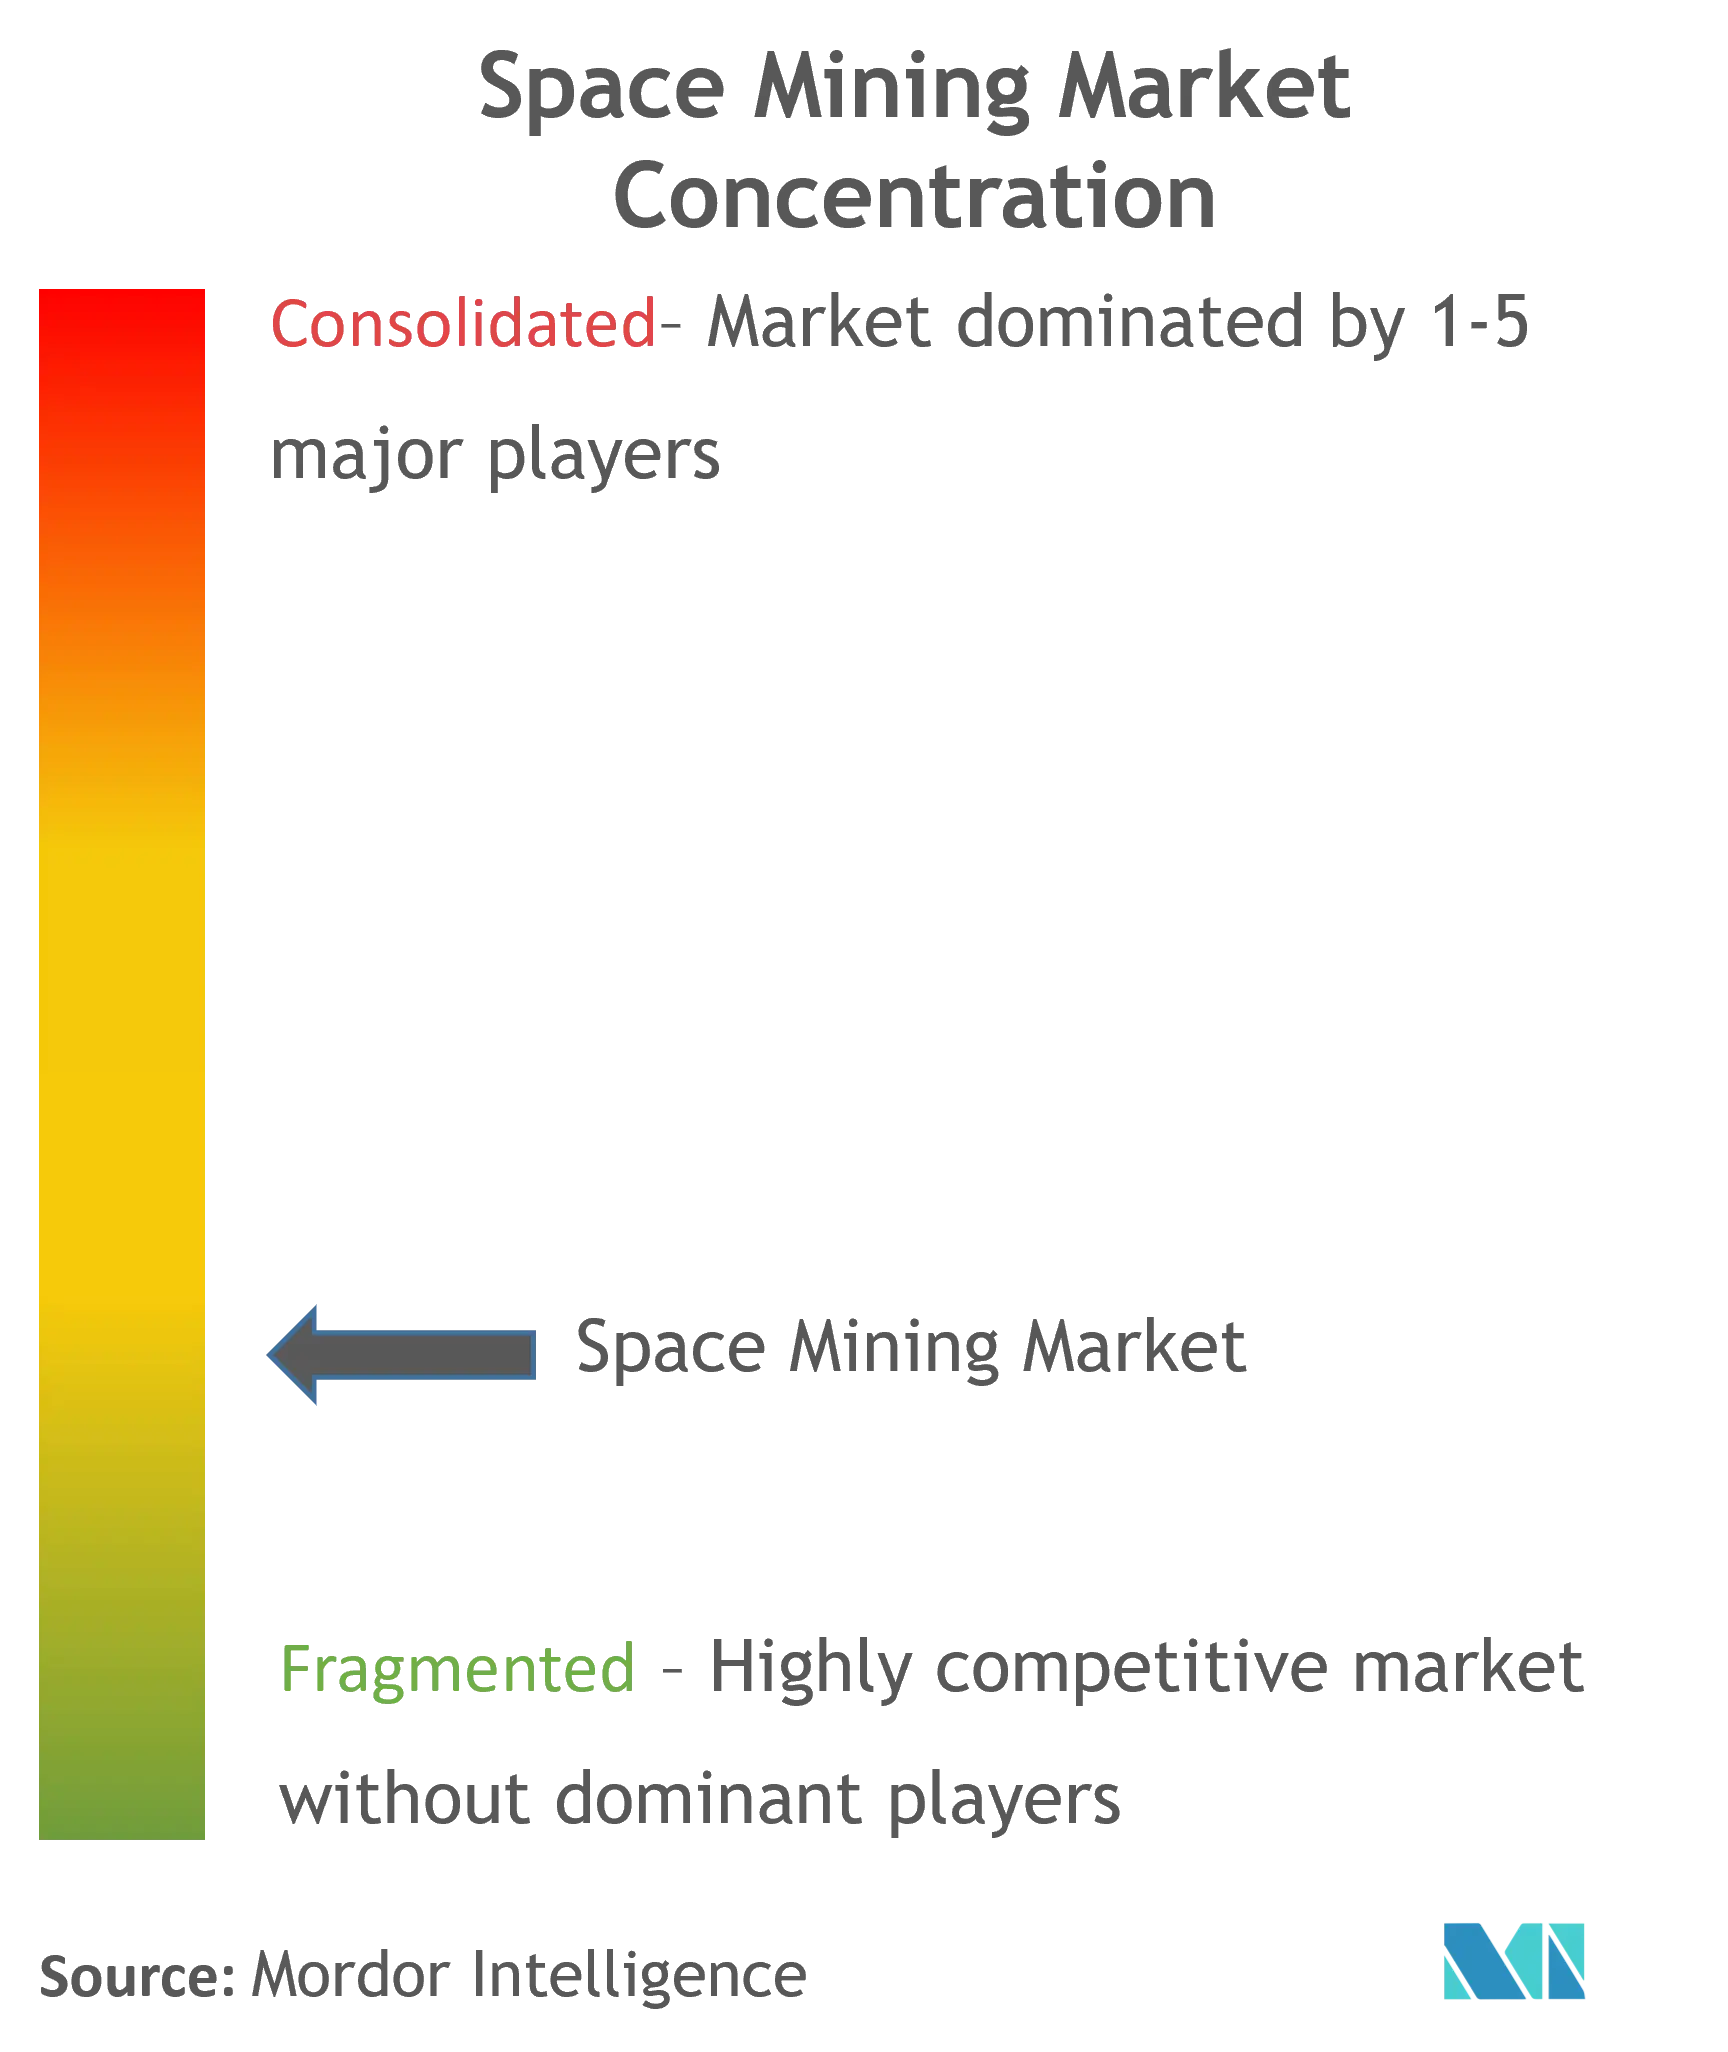 Space Mining Market Concentration